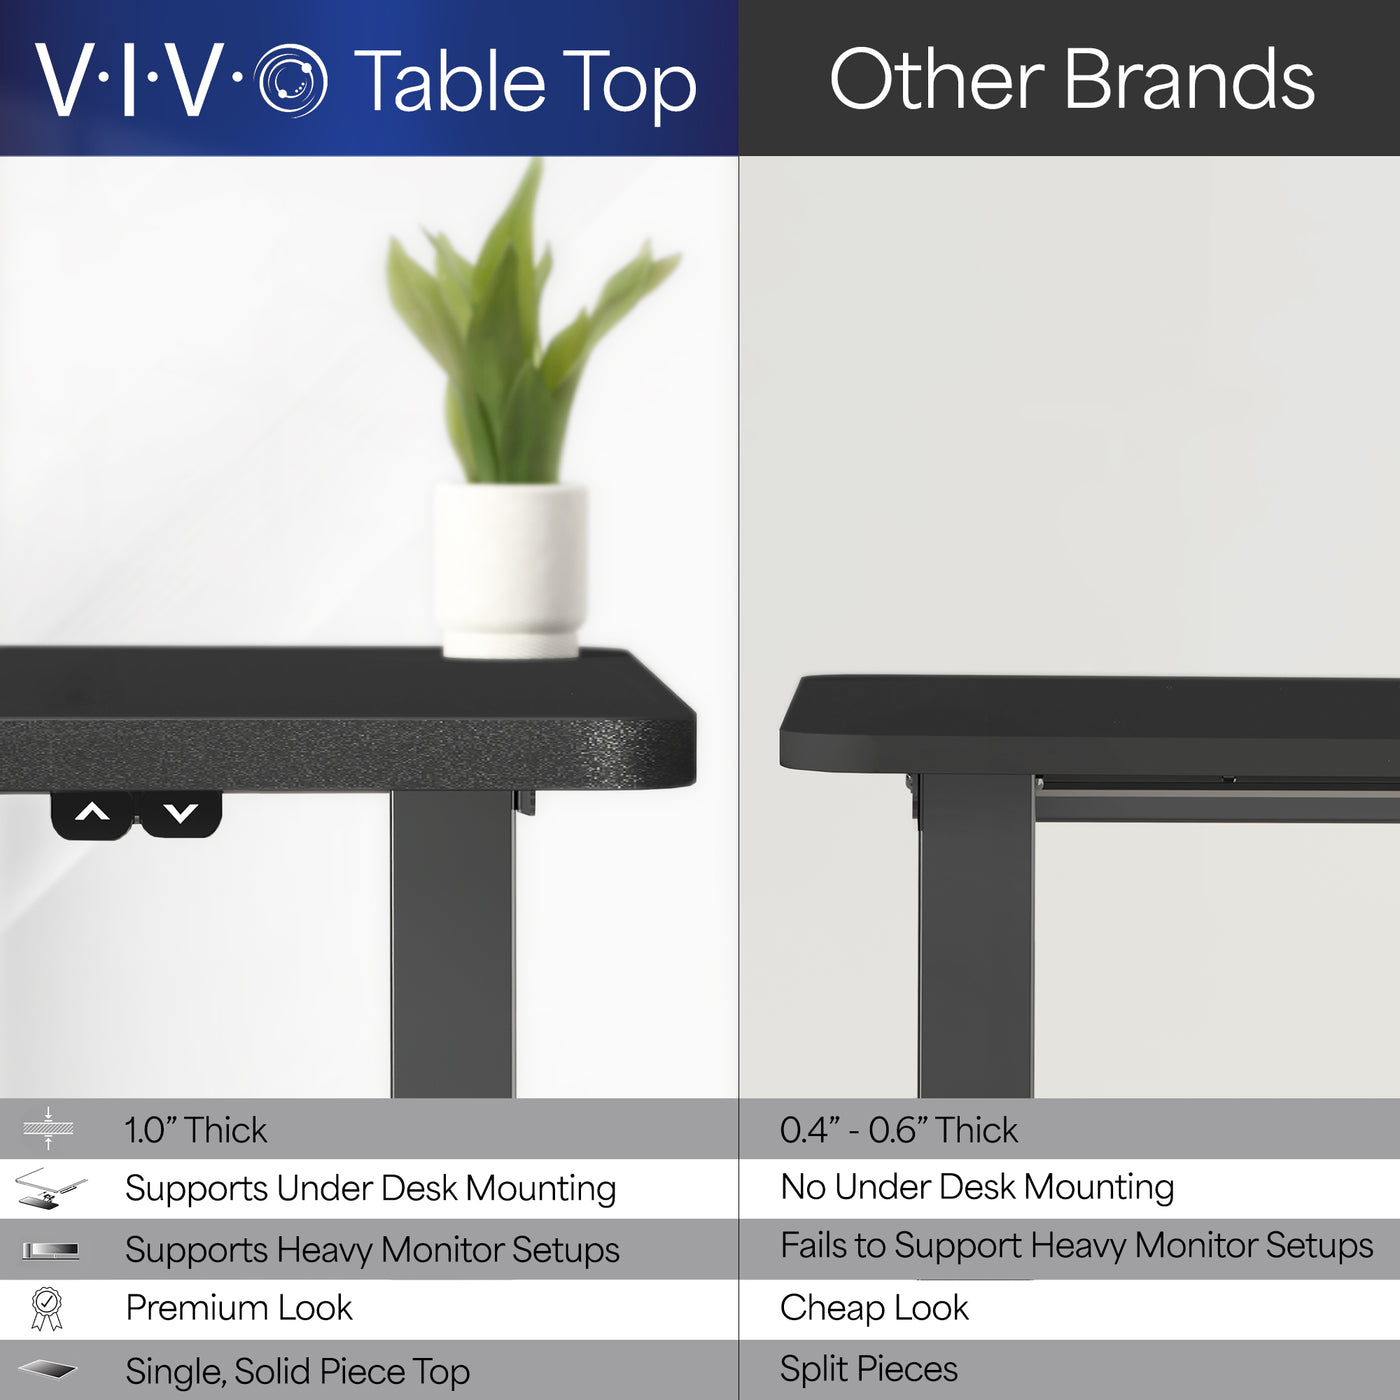 Compact heavy-duty electric height adjustable desktop workstation from VIVO.